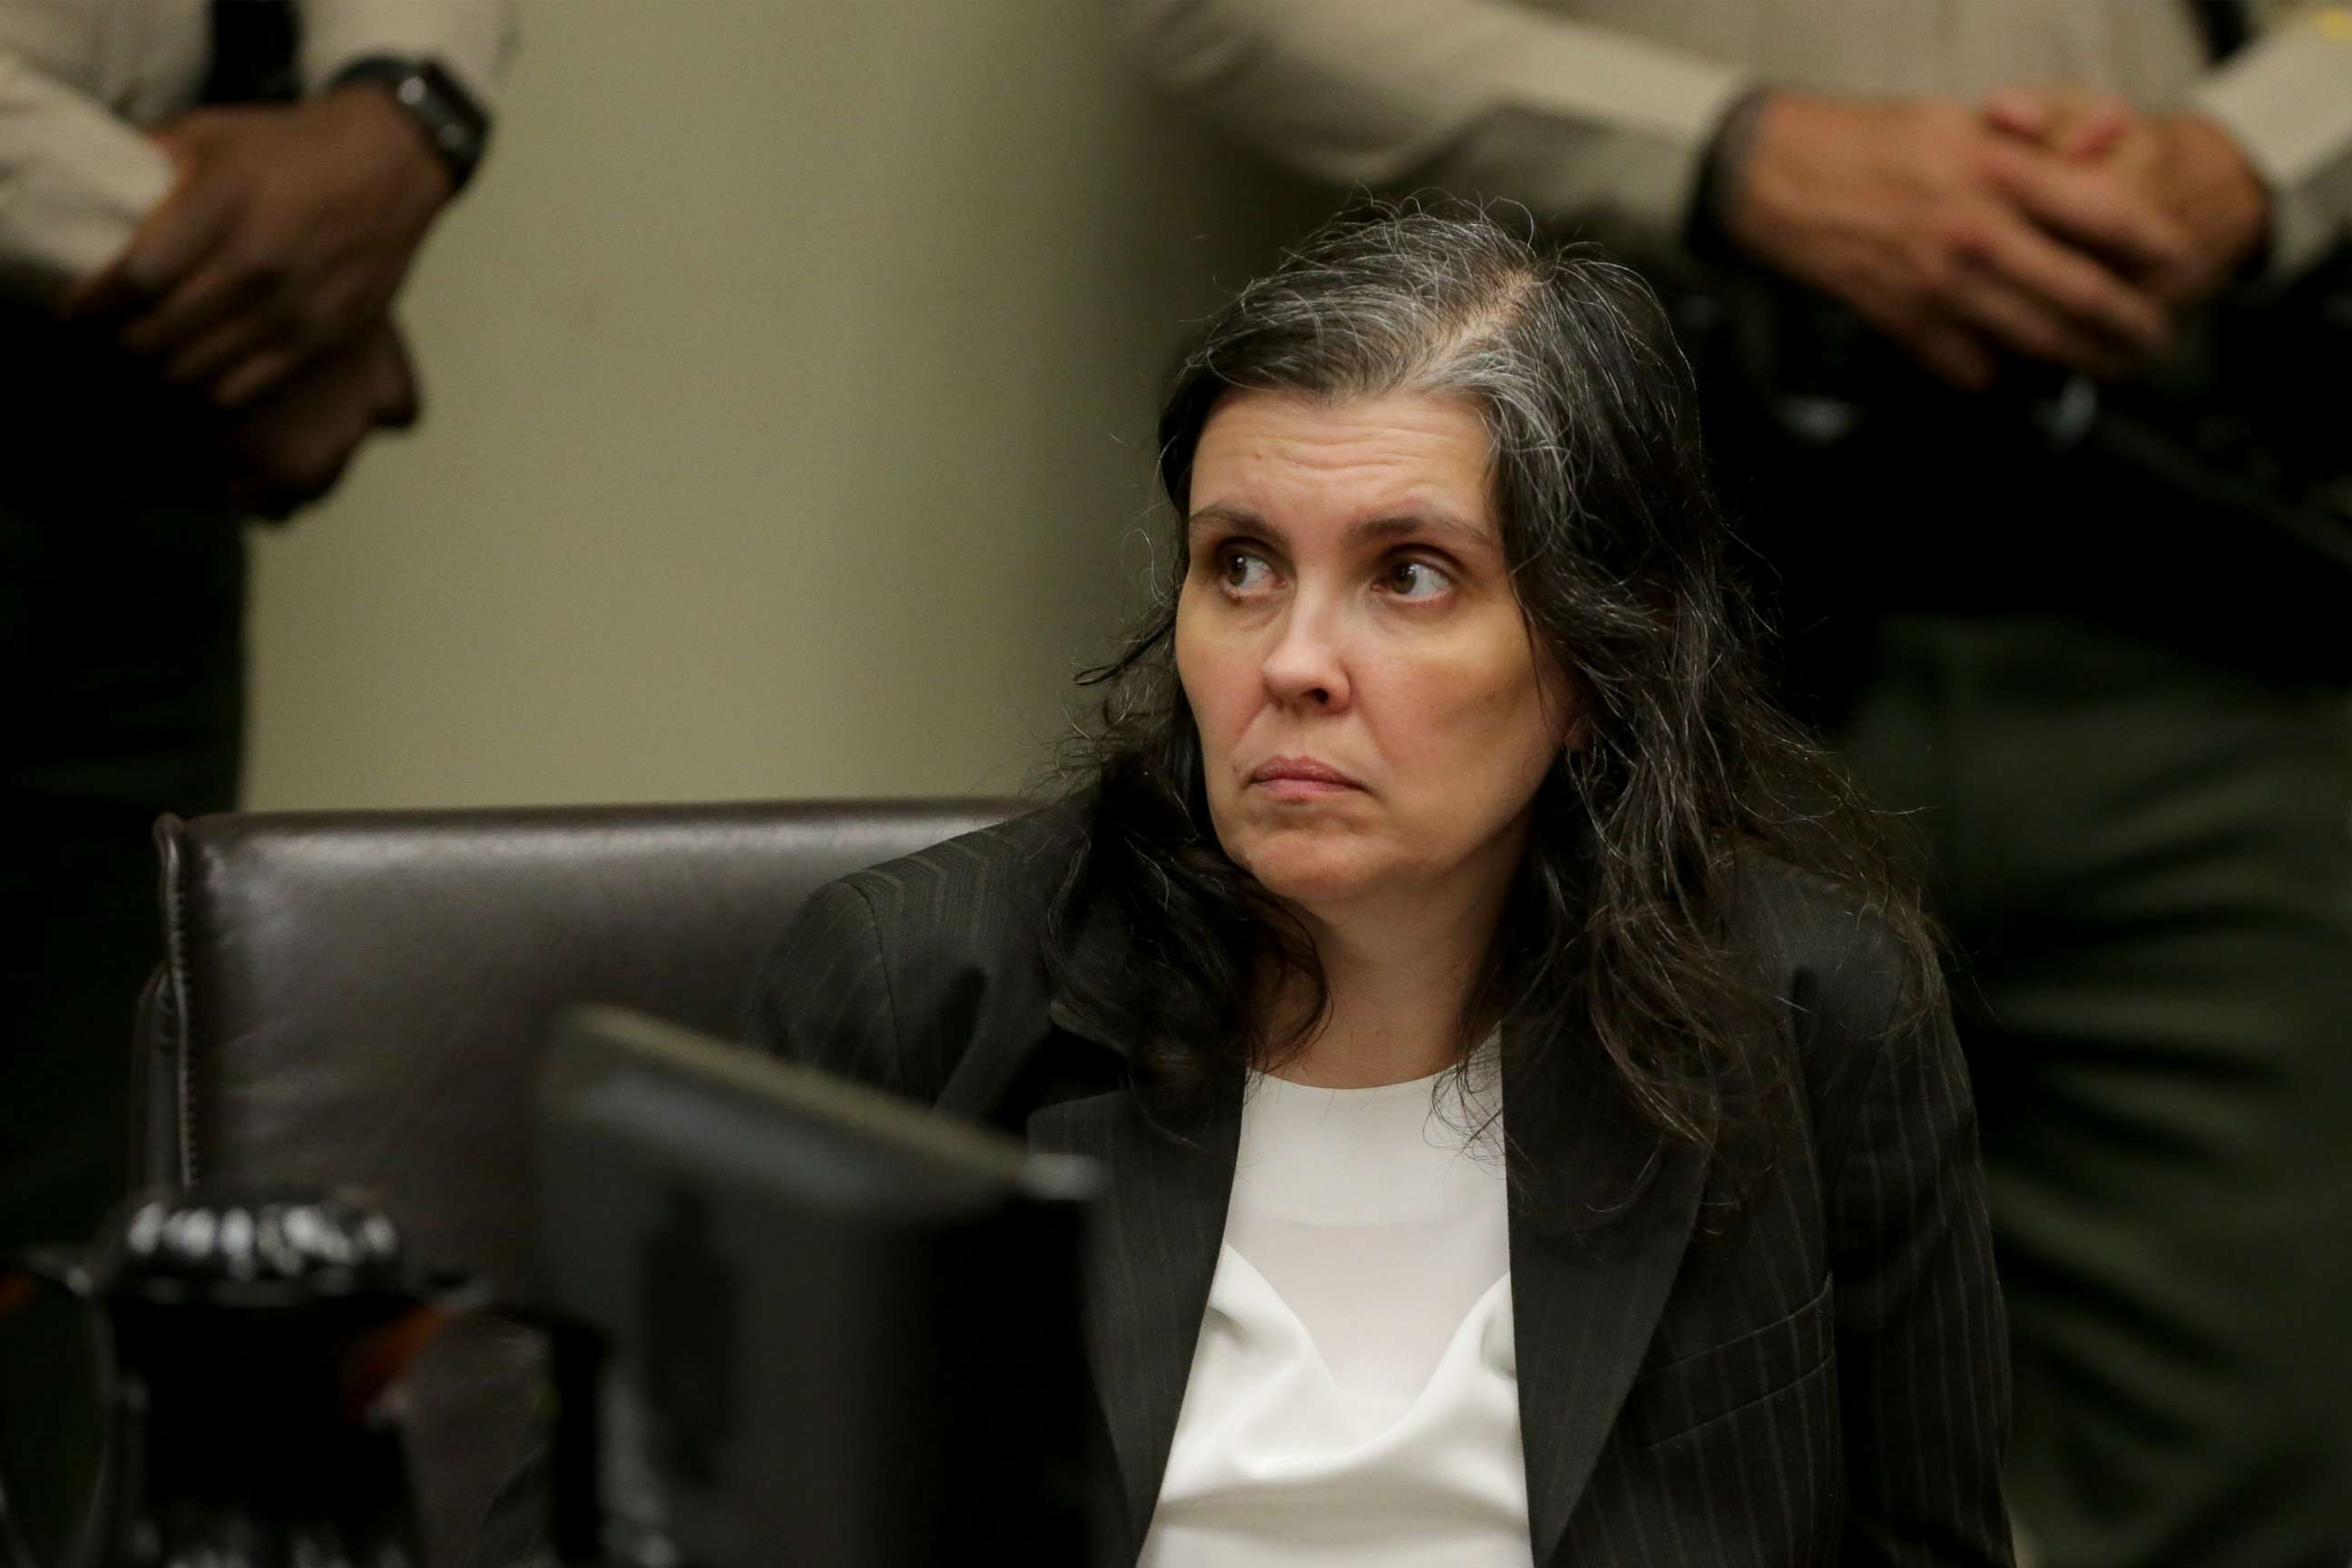 PHOTO: Louise Anna Turpin appears in court for arraignment with attorneys, Jan. 18, 2018, in Riverside, Calif.